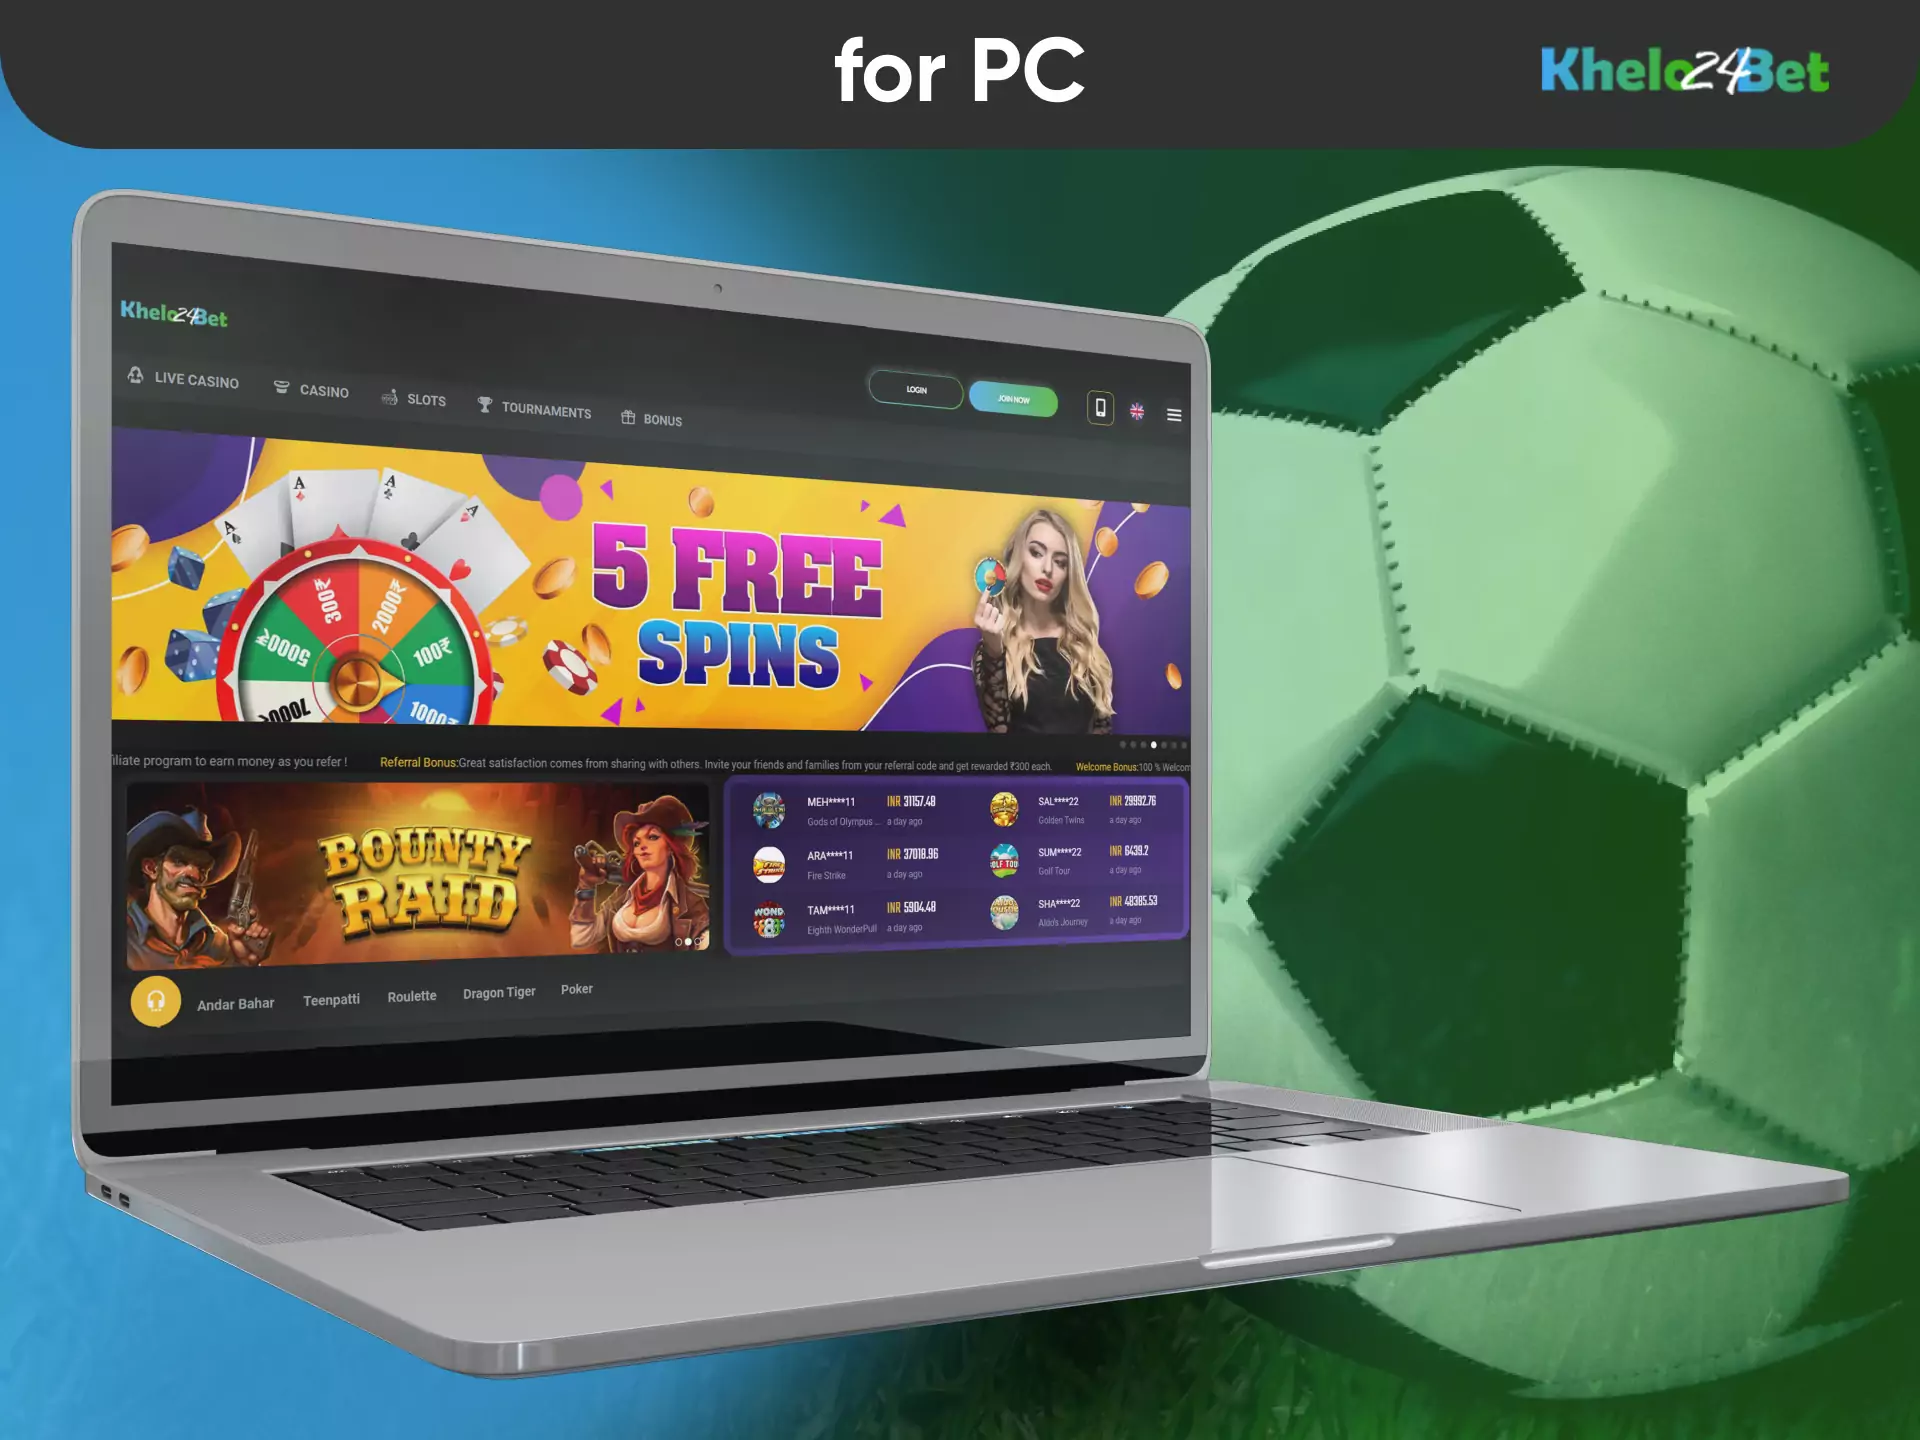 The Khelo24bet site is well-developed for any PC device.